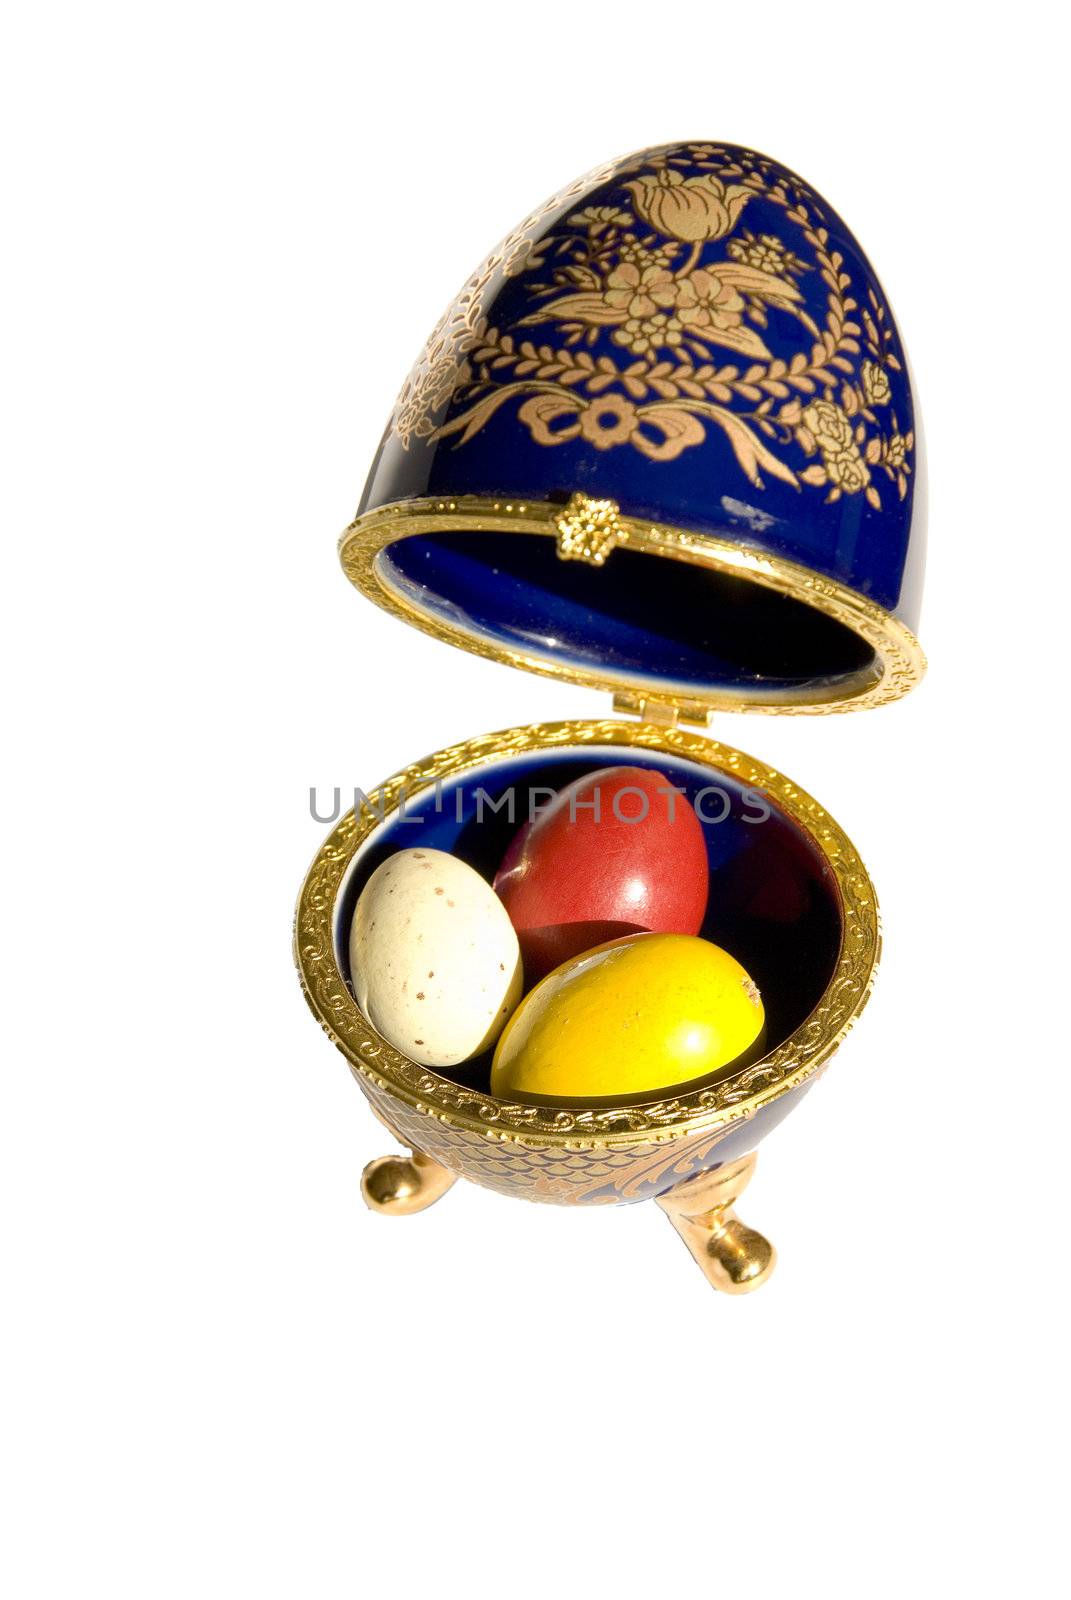 Faberge copy with real Easter eggs in it by sauletas